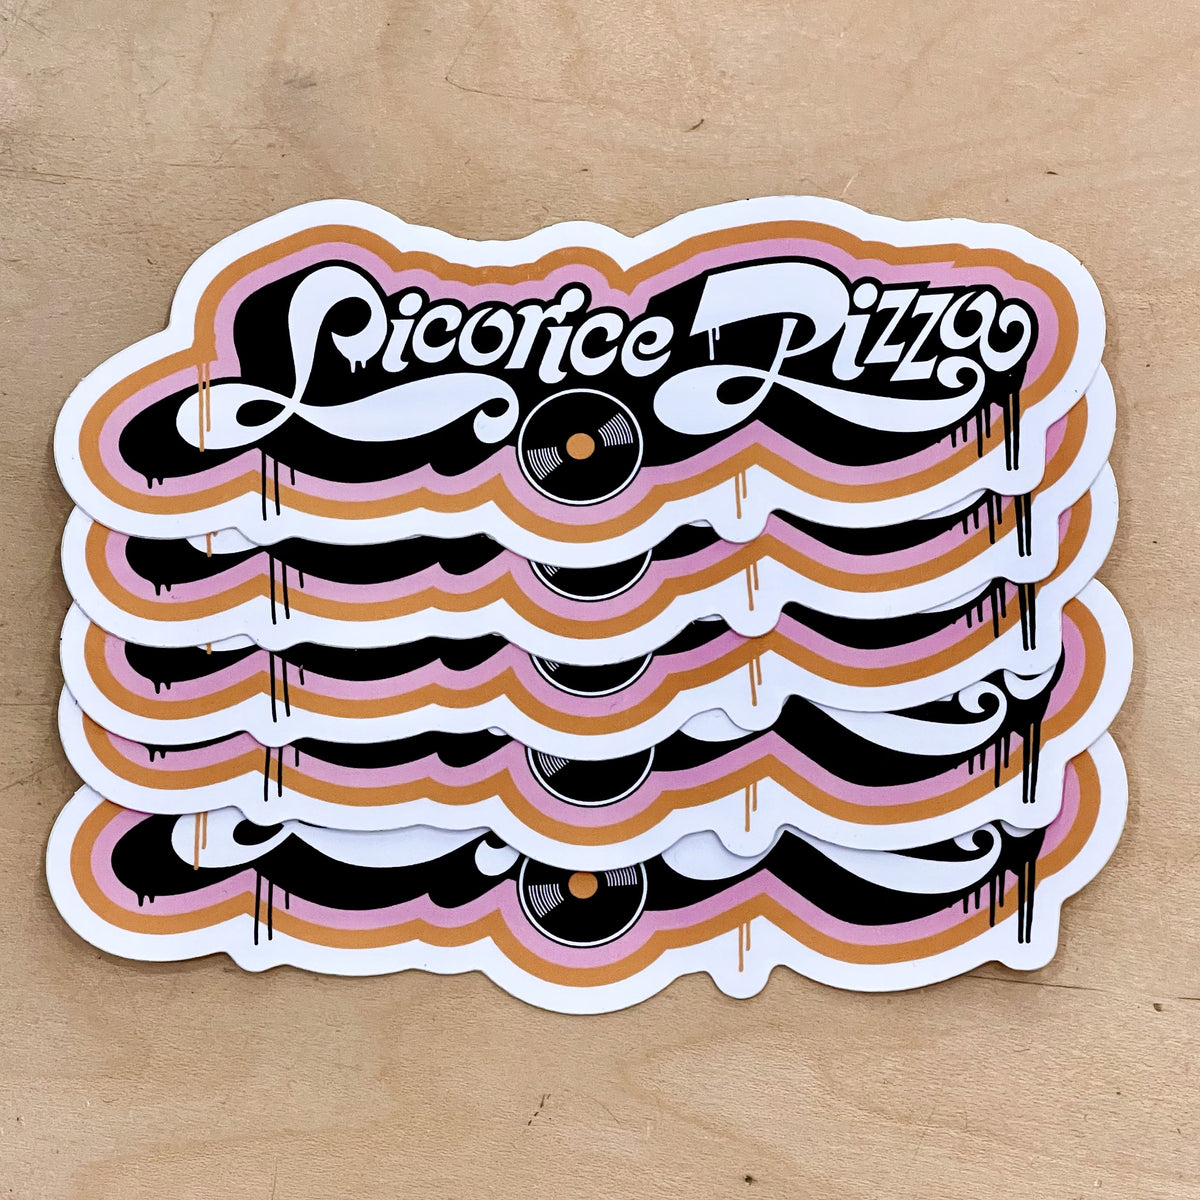 Stickers, 5 pack, Licorice Pizza logo, 5 inch x 1.87